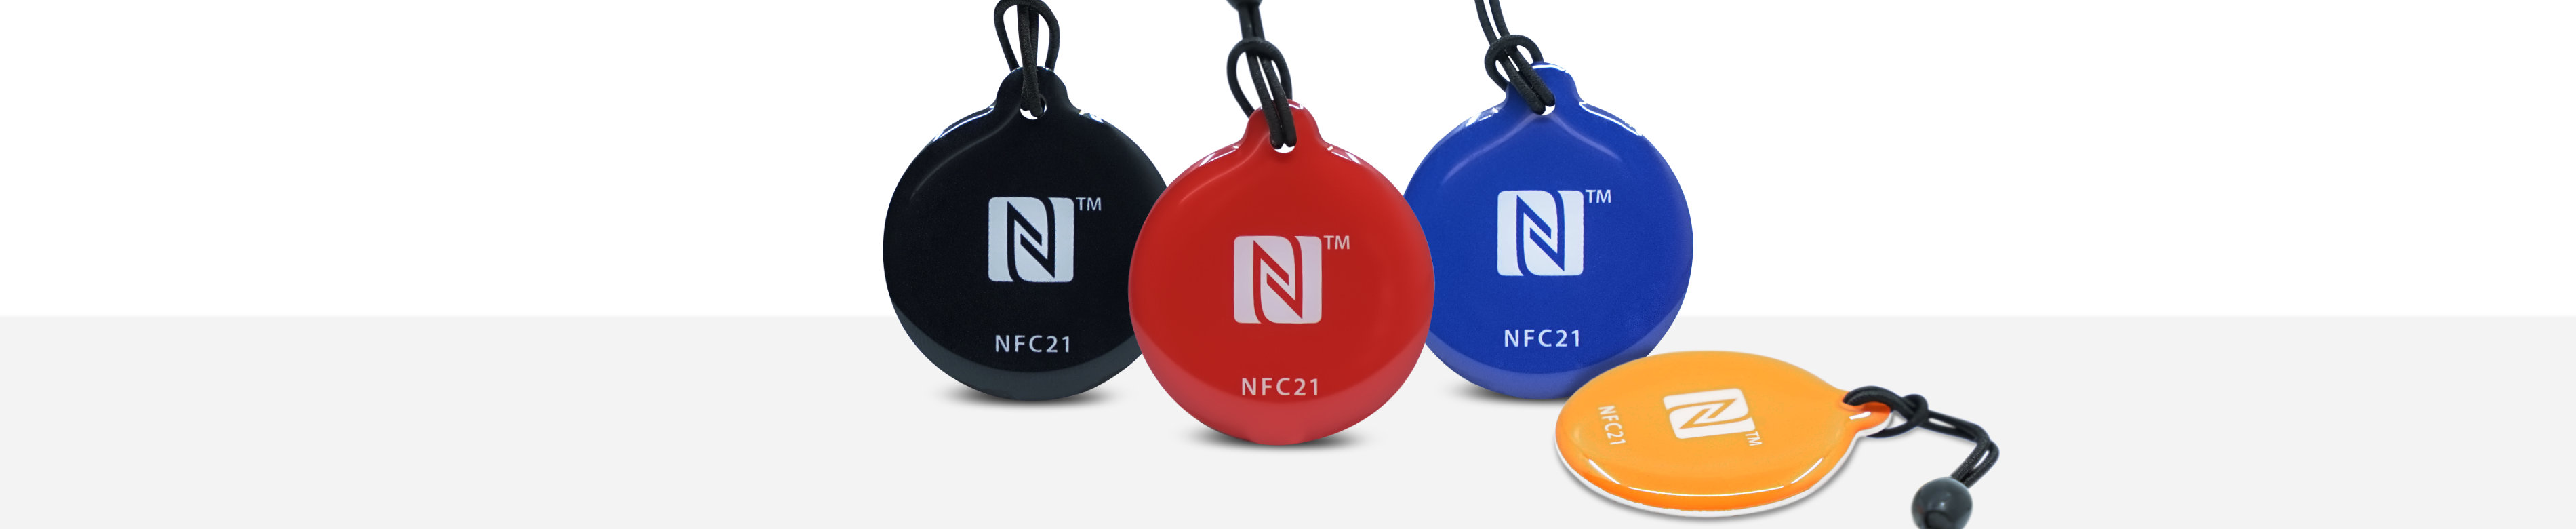 Epoxy key fob side by side in the colours black, red, blue and orange